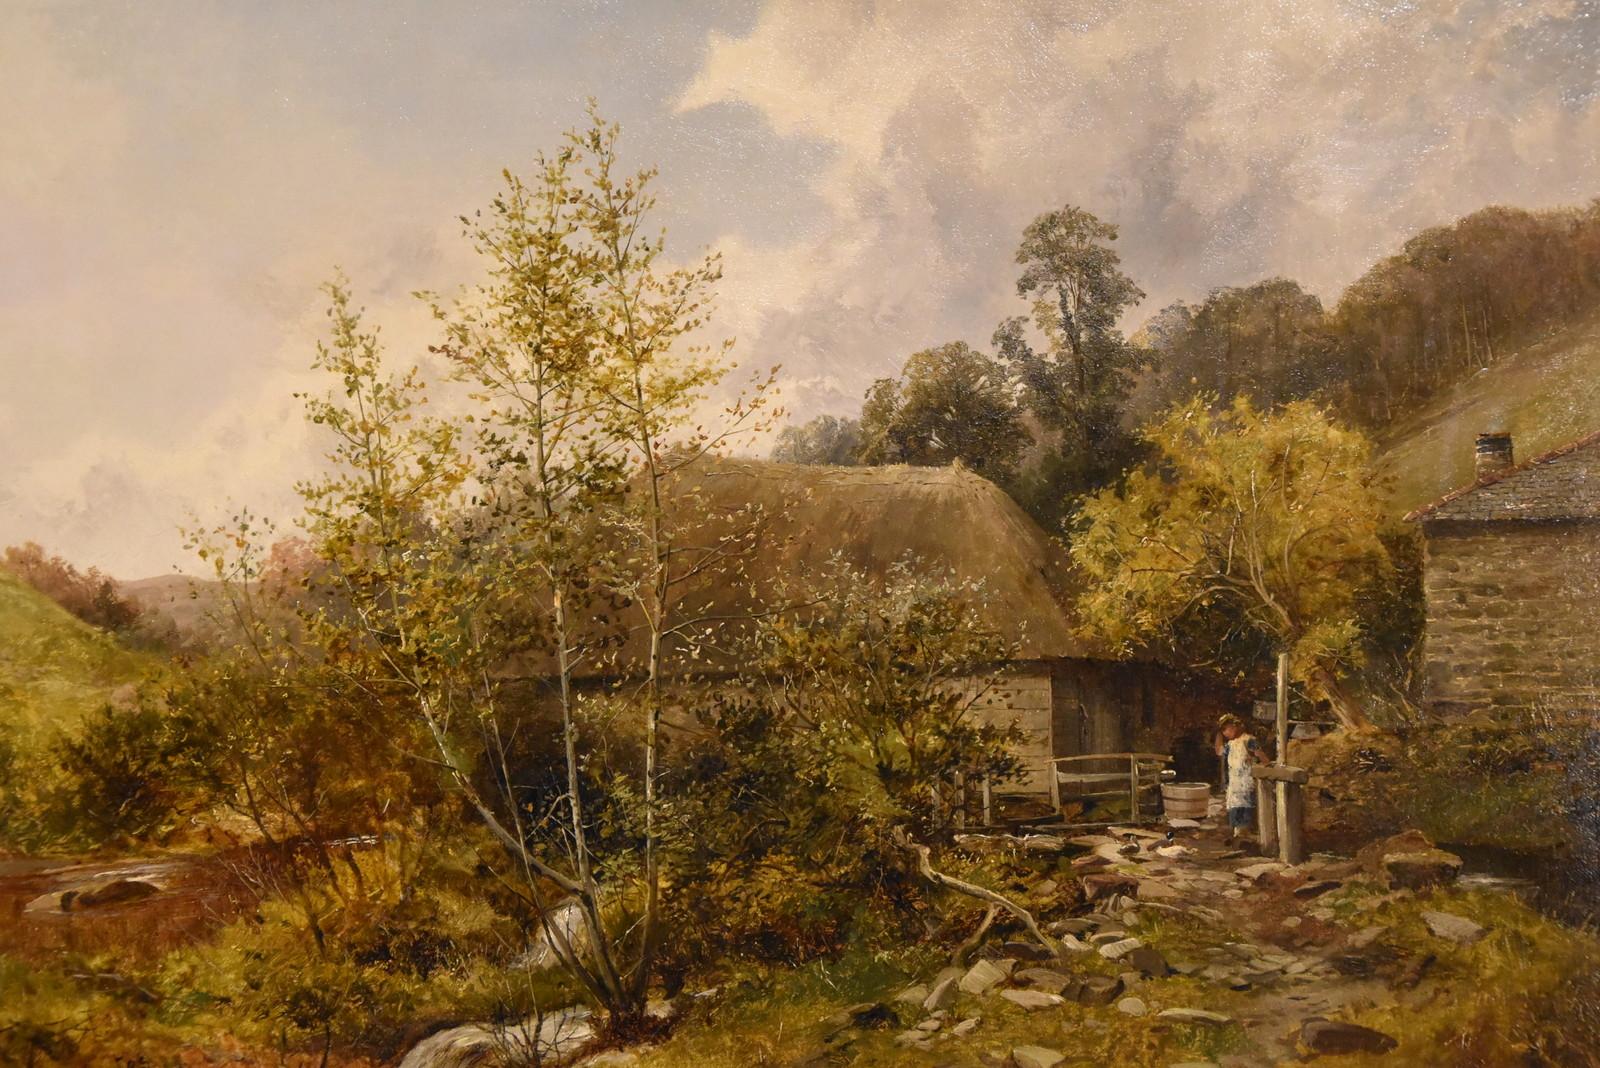 David Bates b.1840 Landscape Painting - Oil Painting  by David Bates "Mill on the Inny, Cornwall" Rural Victorian